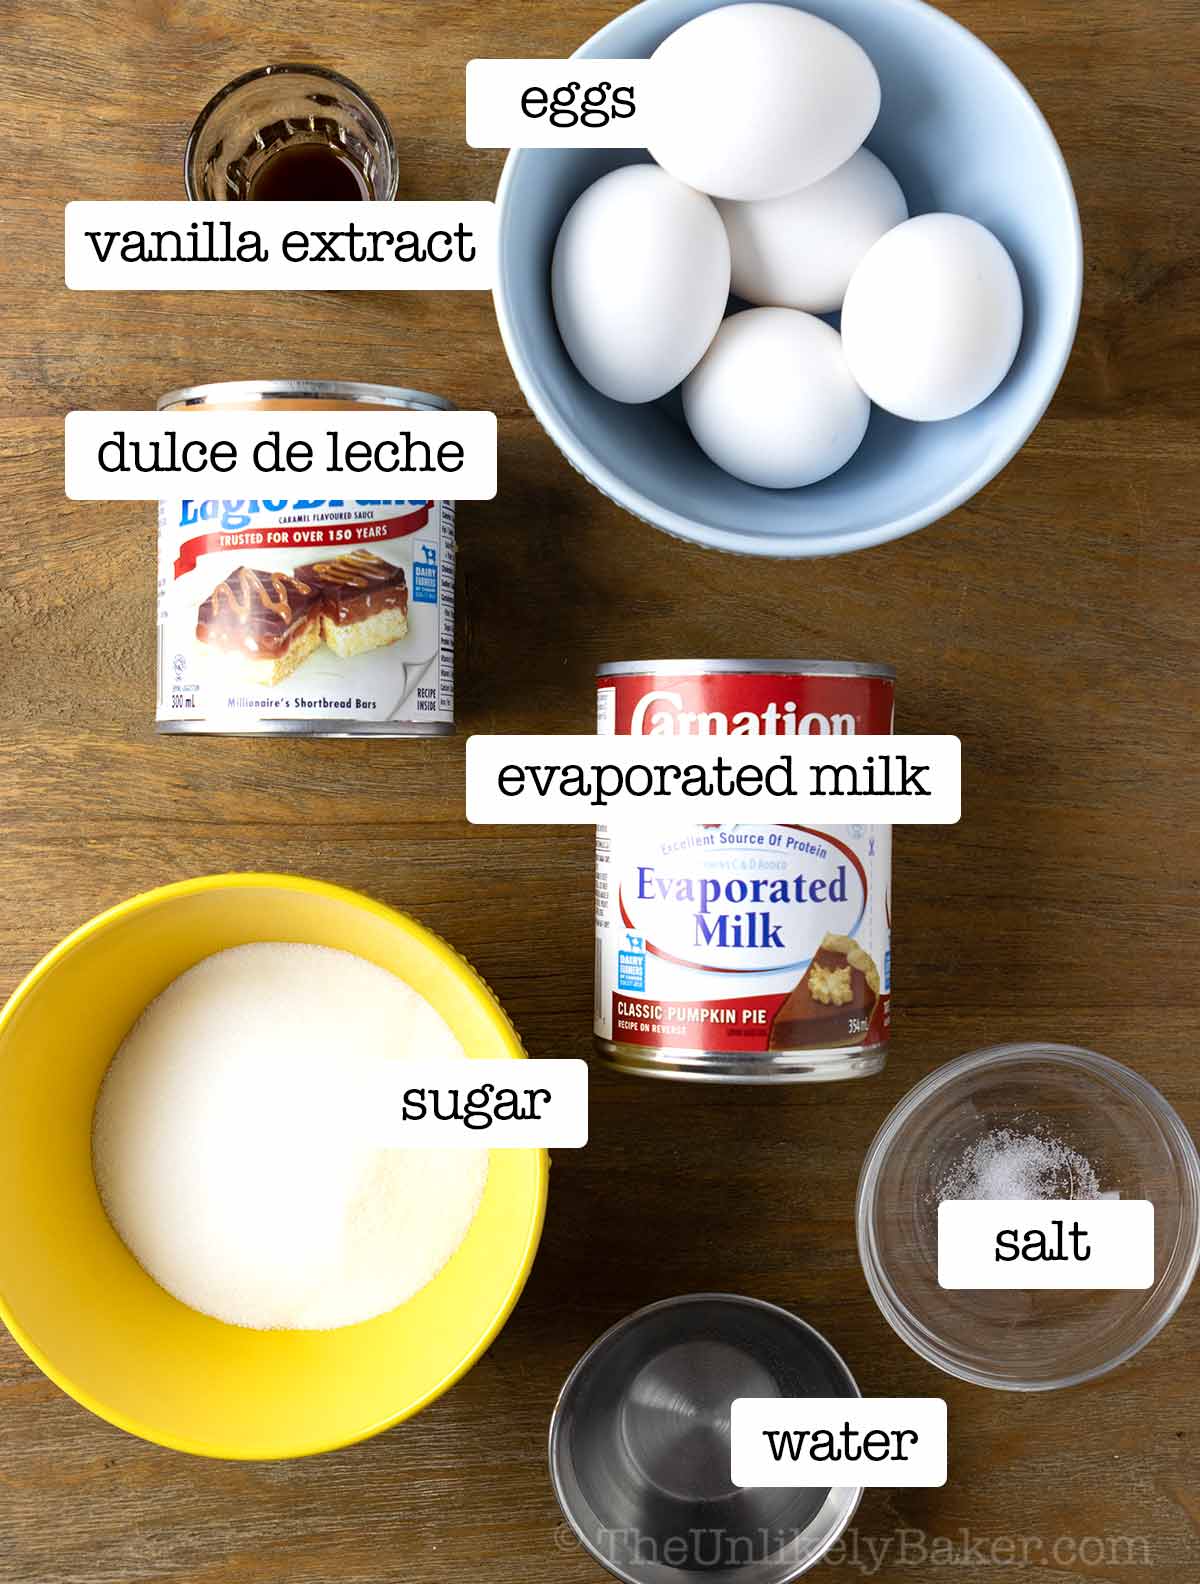 Dulce de leche flan ingredients with text overlay.